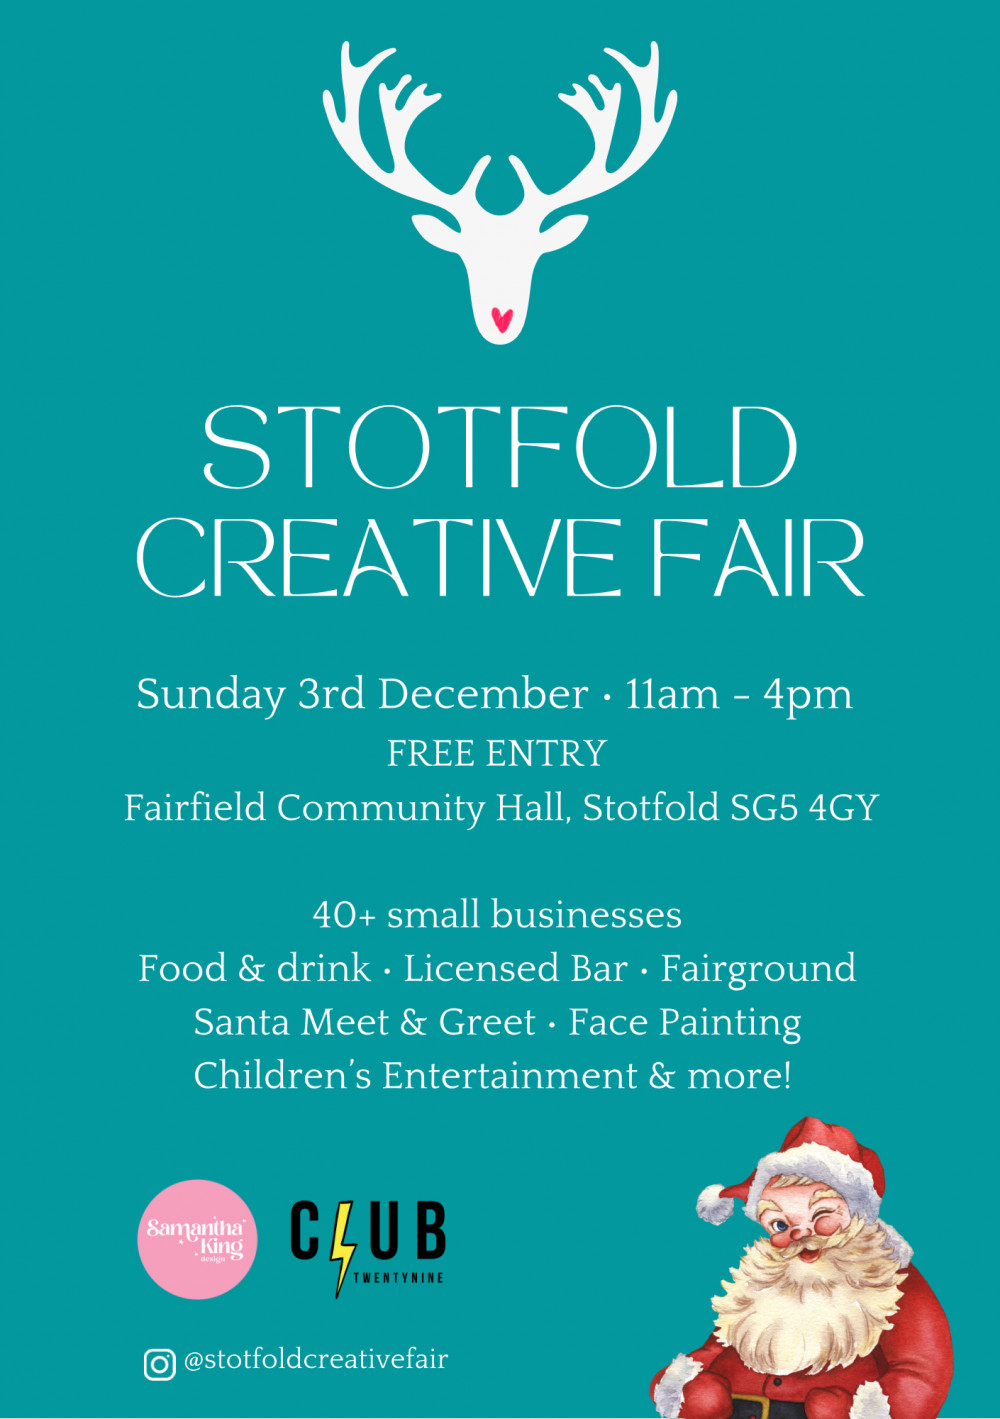 Save the date for Stotfold Creative Fair 